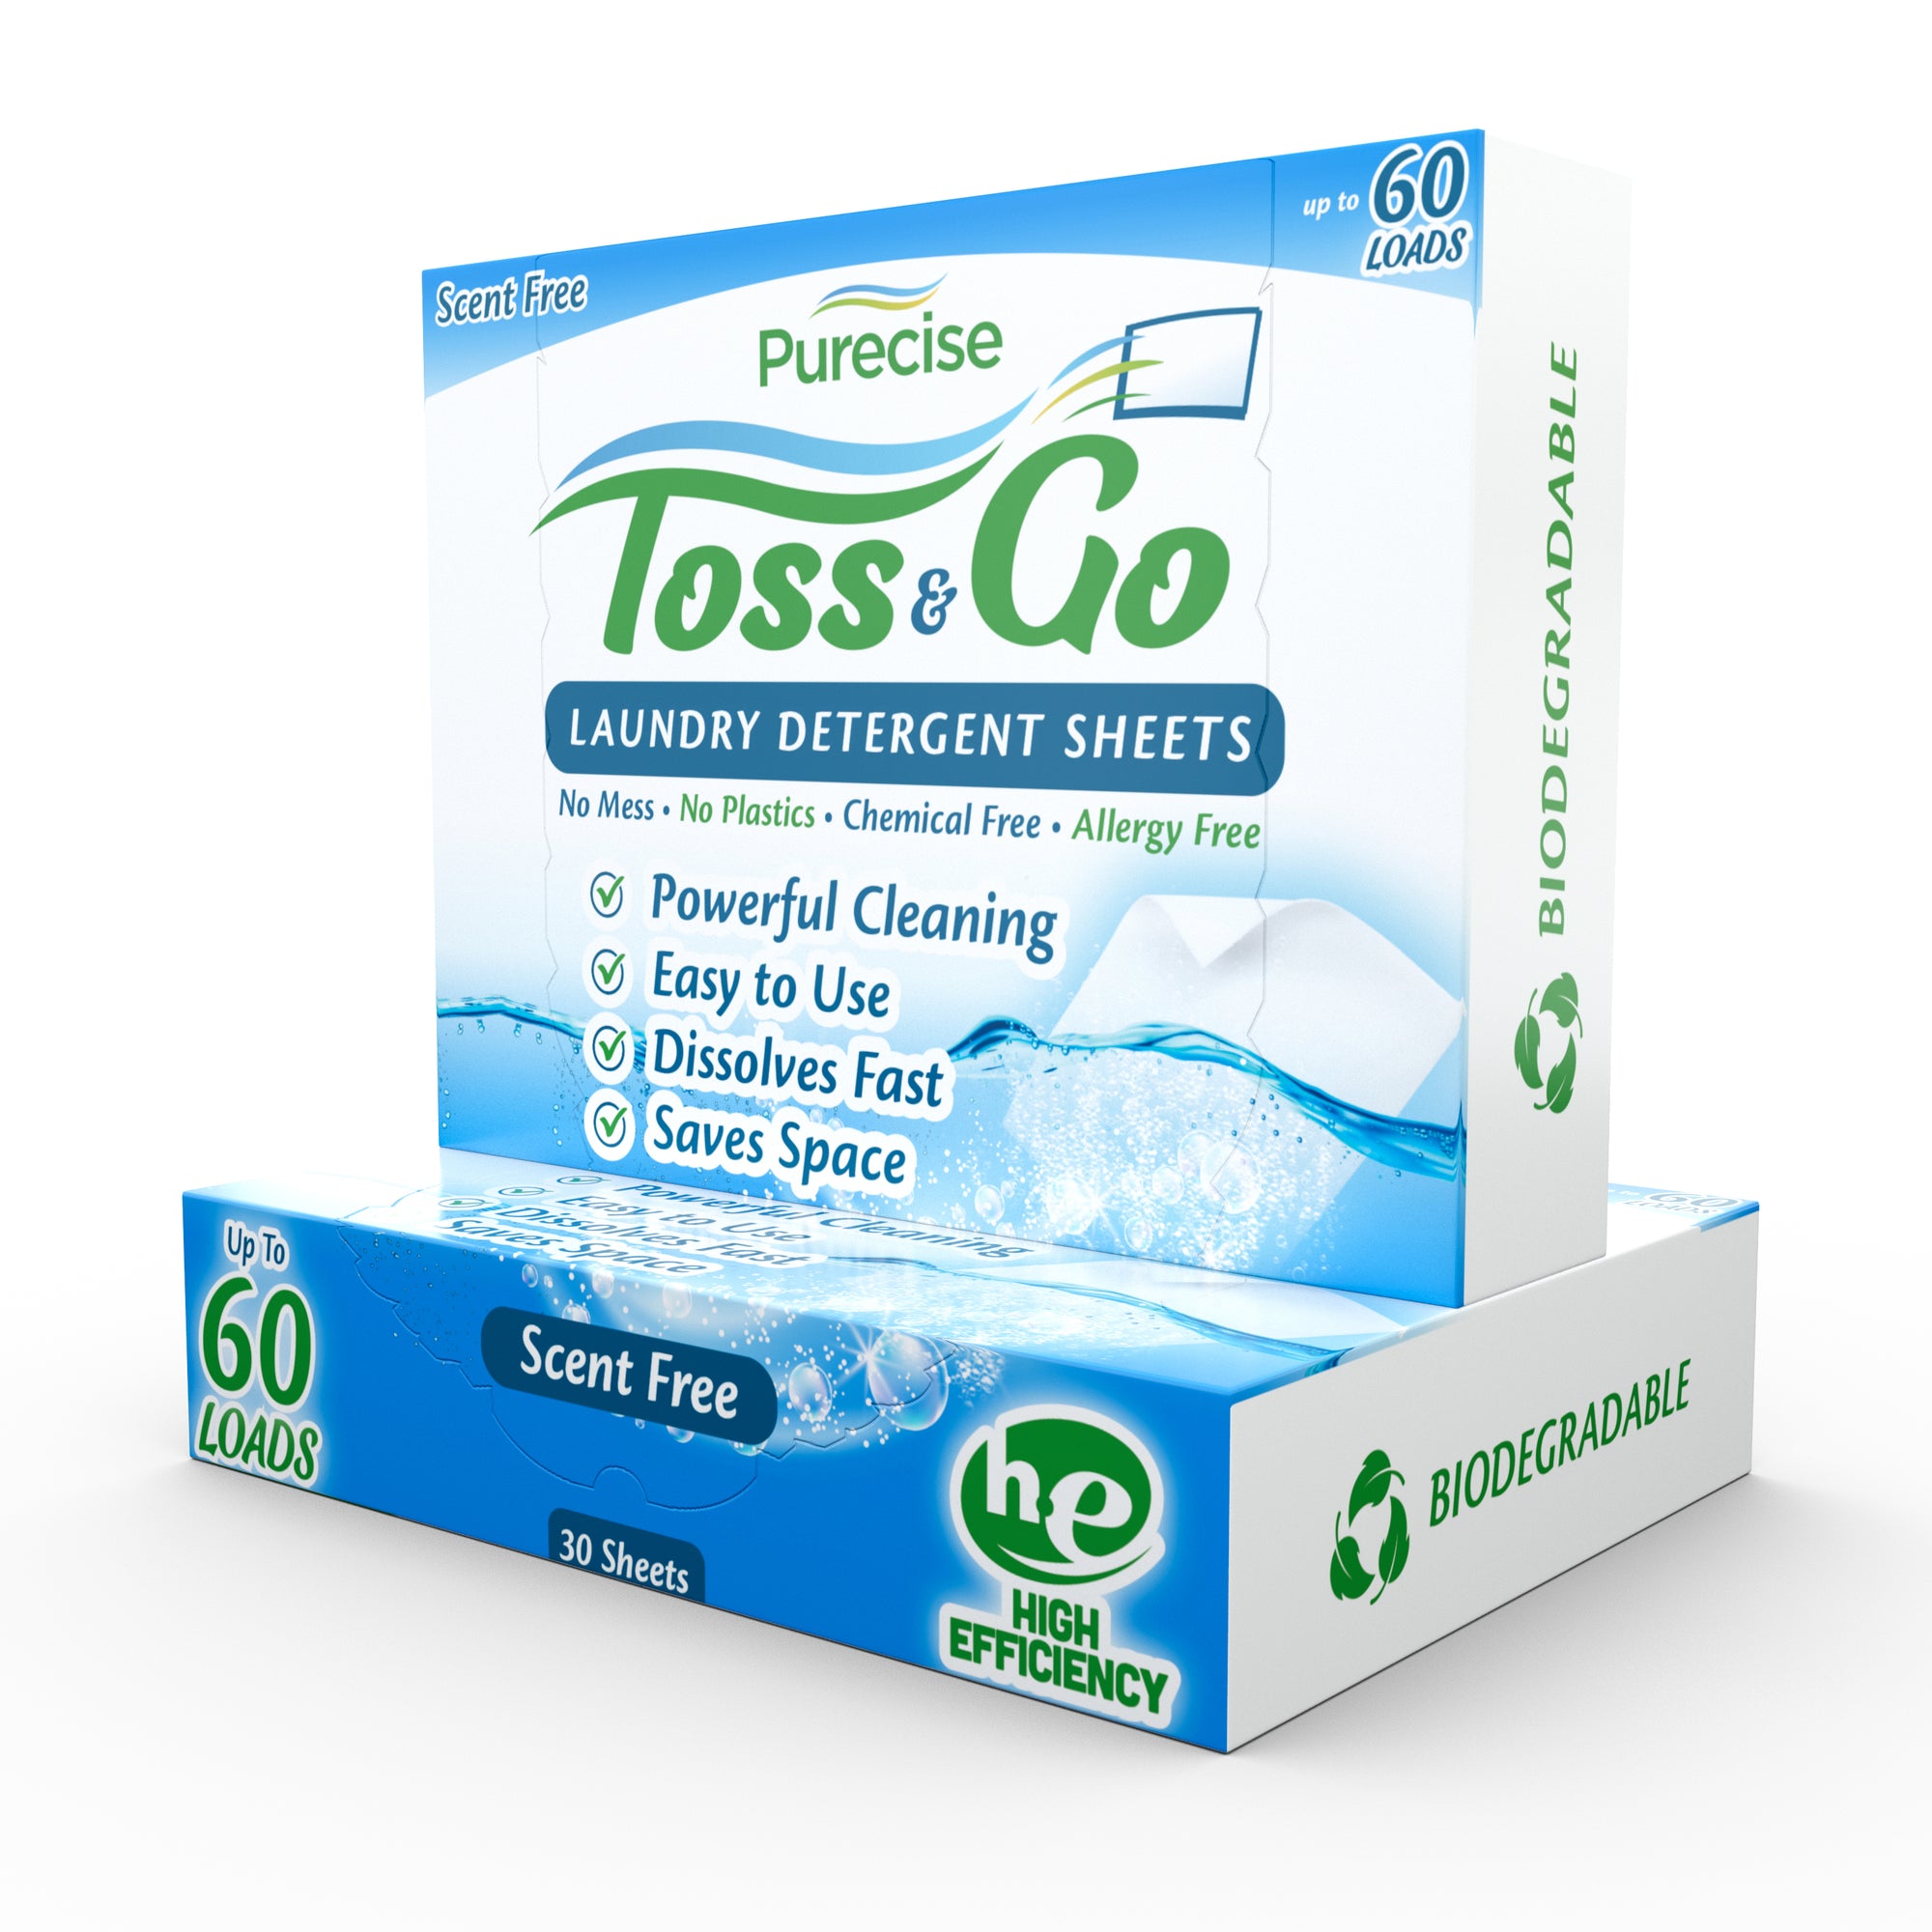 Toss & Go Laundry Detergent Sheets Scent Free